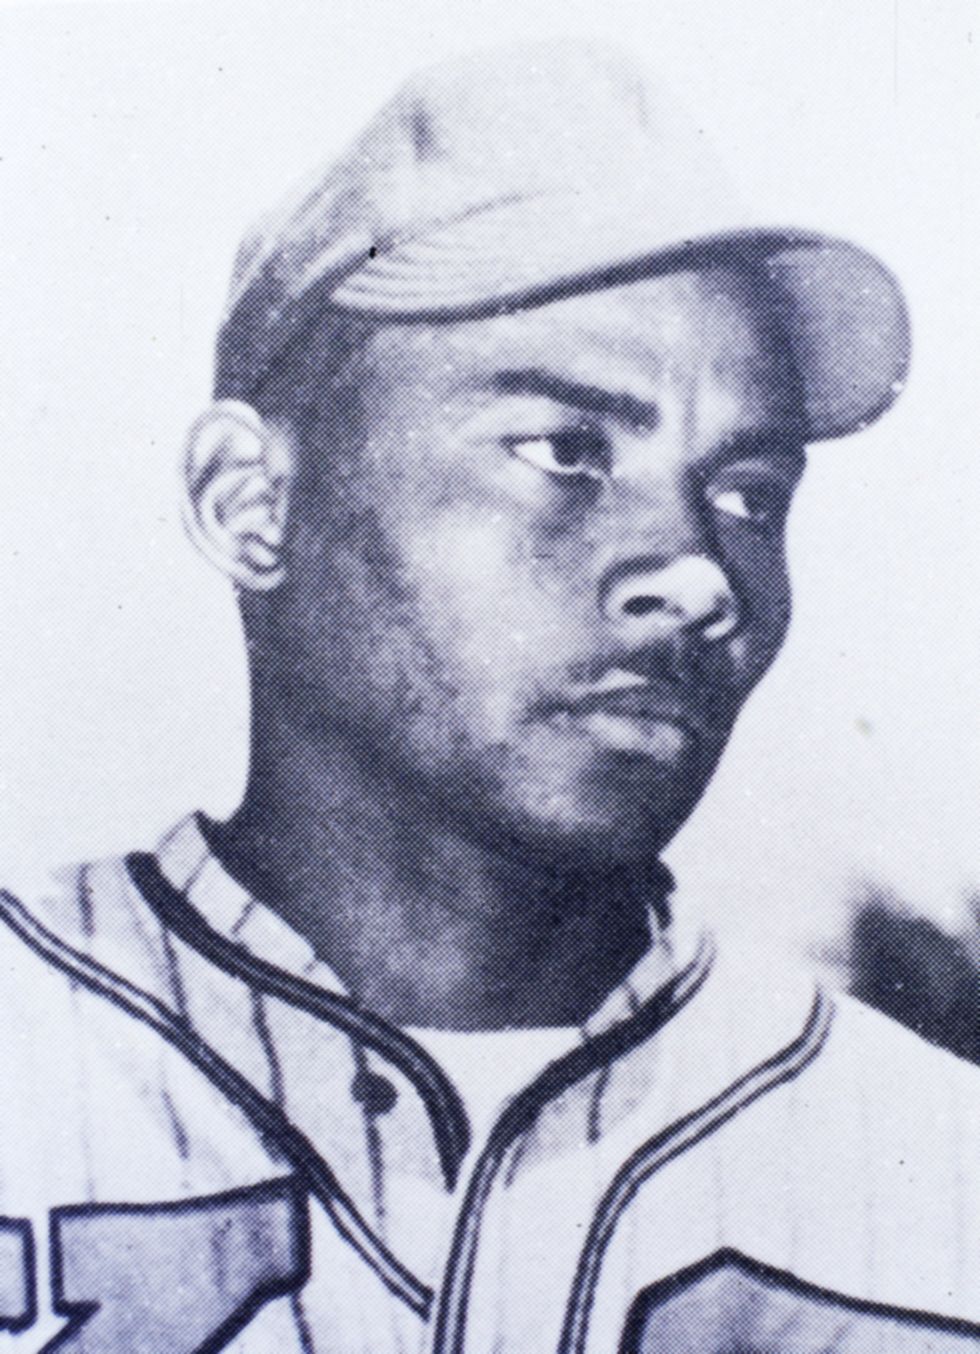 hilton smith looking on while wearing his baseball uniform